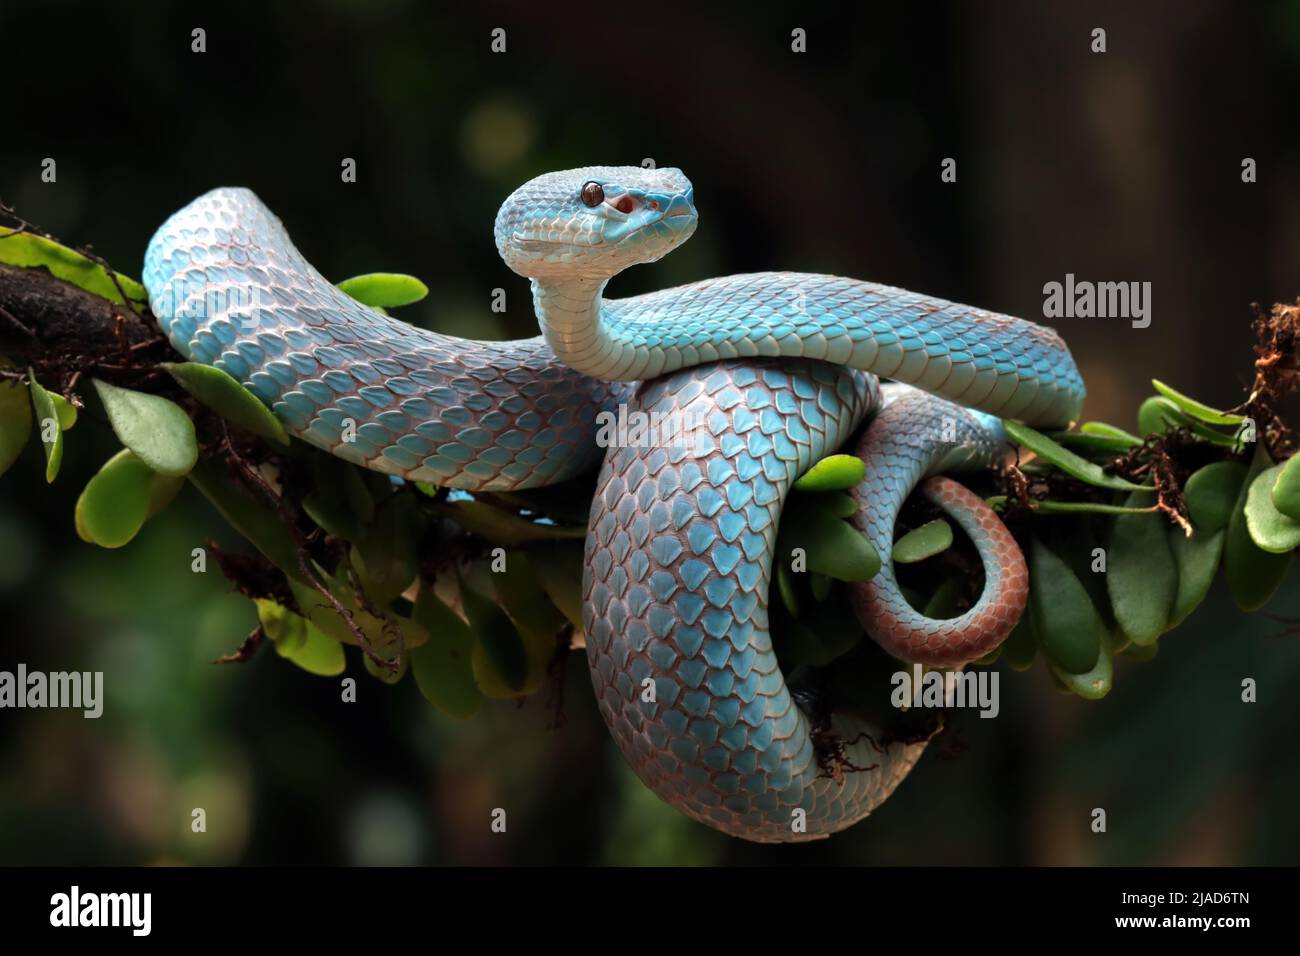 White-lipped island pit viper  snake on a branch, Indonesia Stock Photo